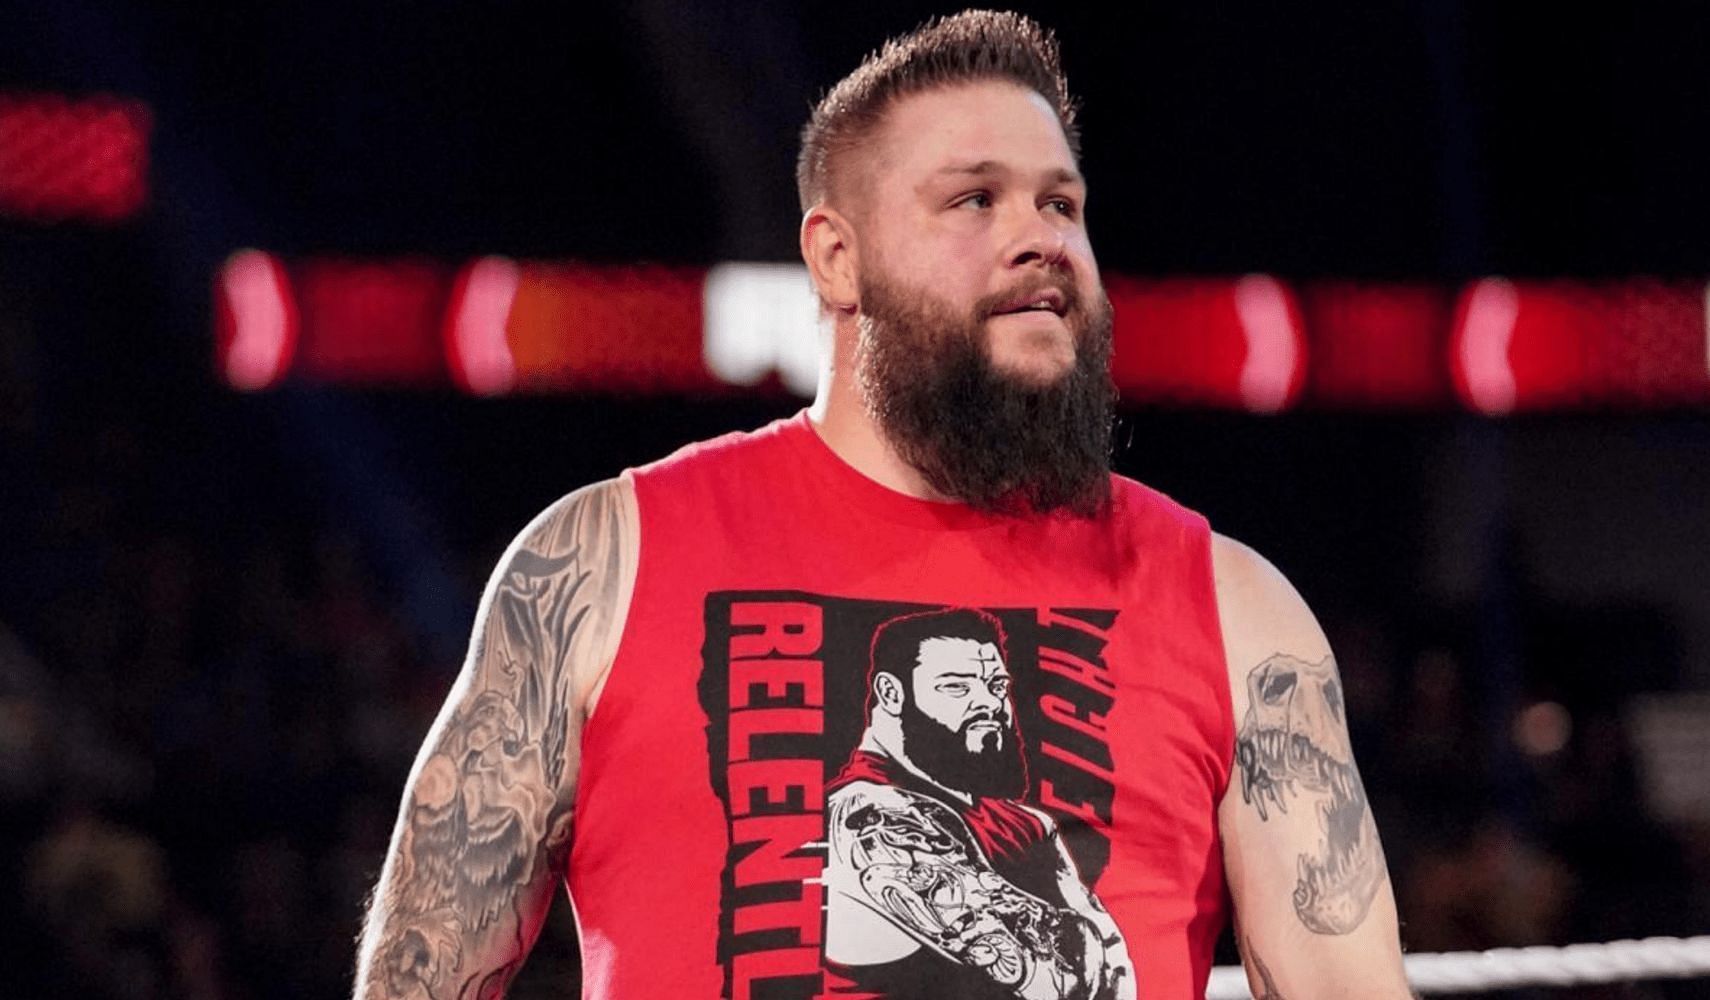 Kevin Owens is in the WWE Championship match at Day 1 on January 1, 2022